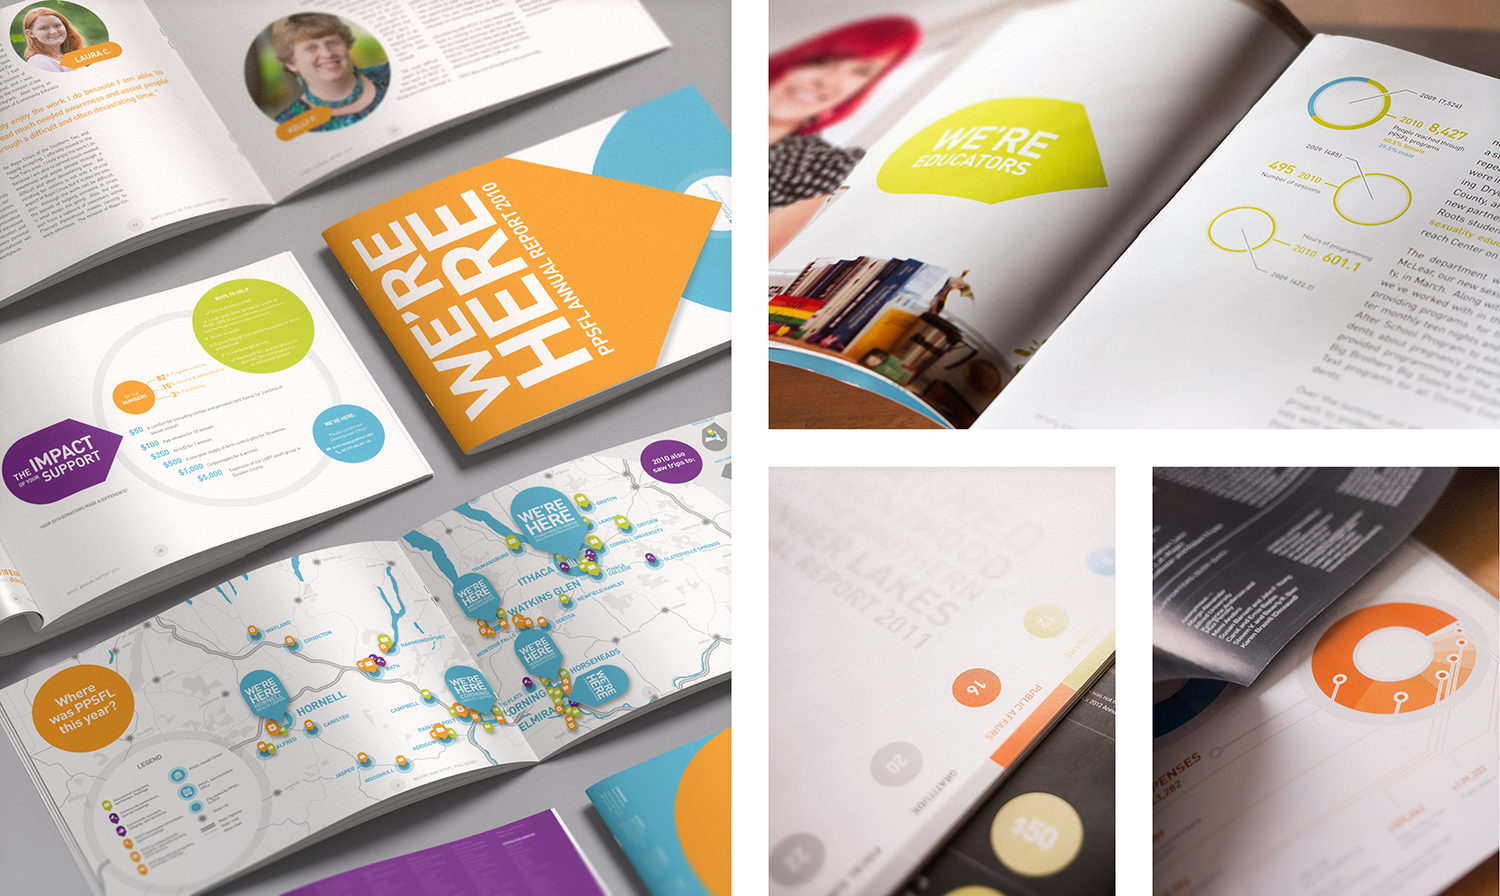 Avana Vana / Selected Work / Planned Parenthood Annual Reports / 2